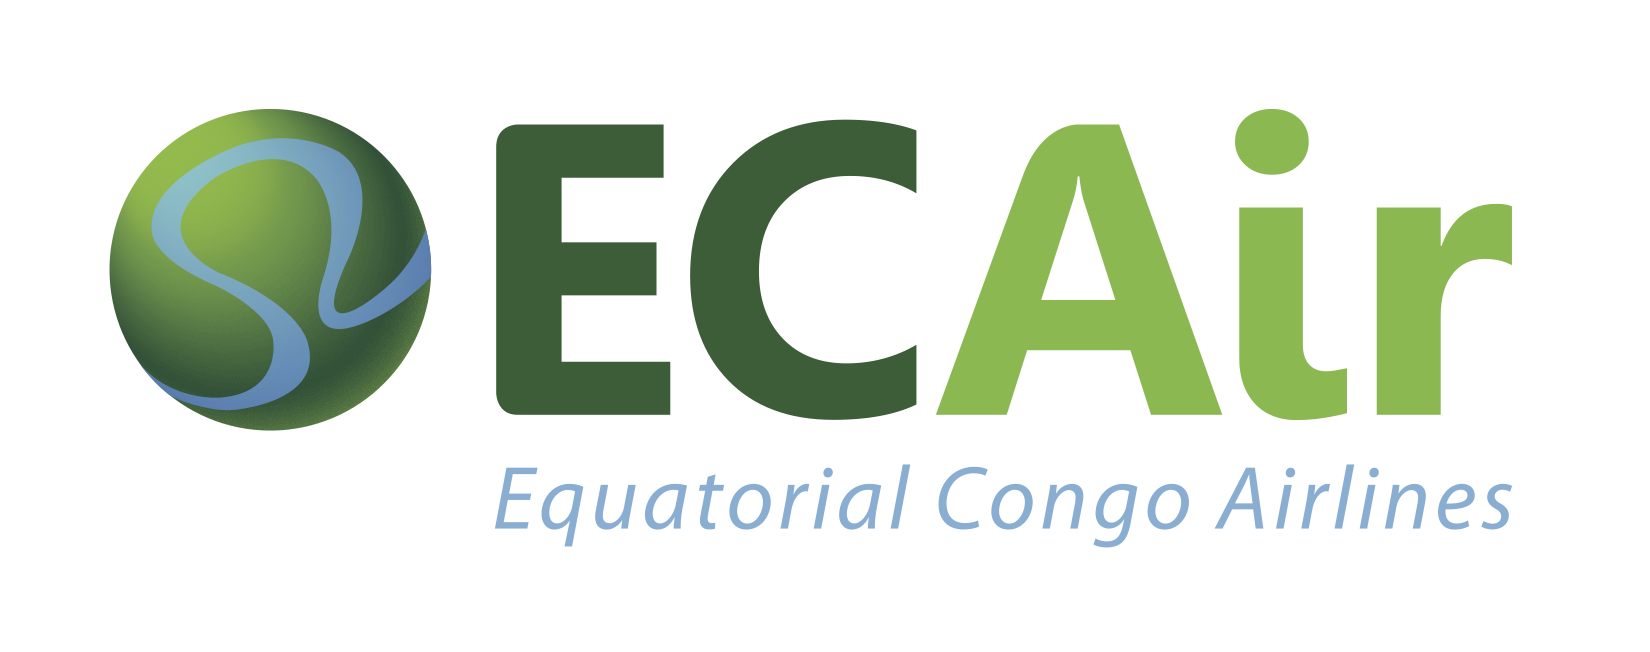 ECAir, Equatorial Congo Airlines, is continuing to expand its network